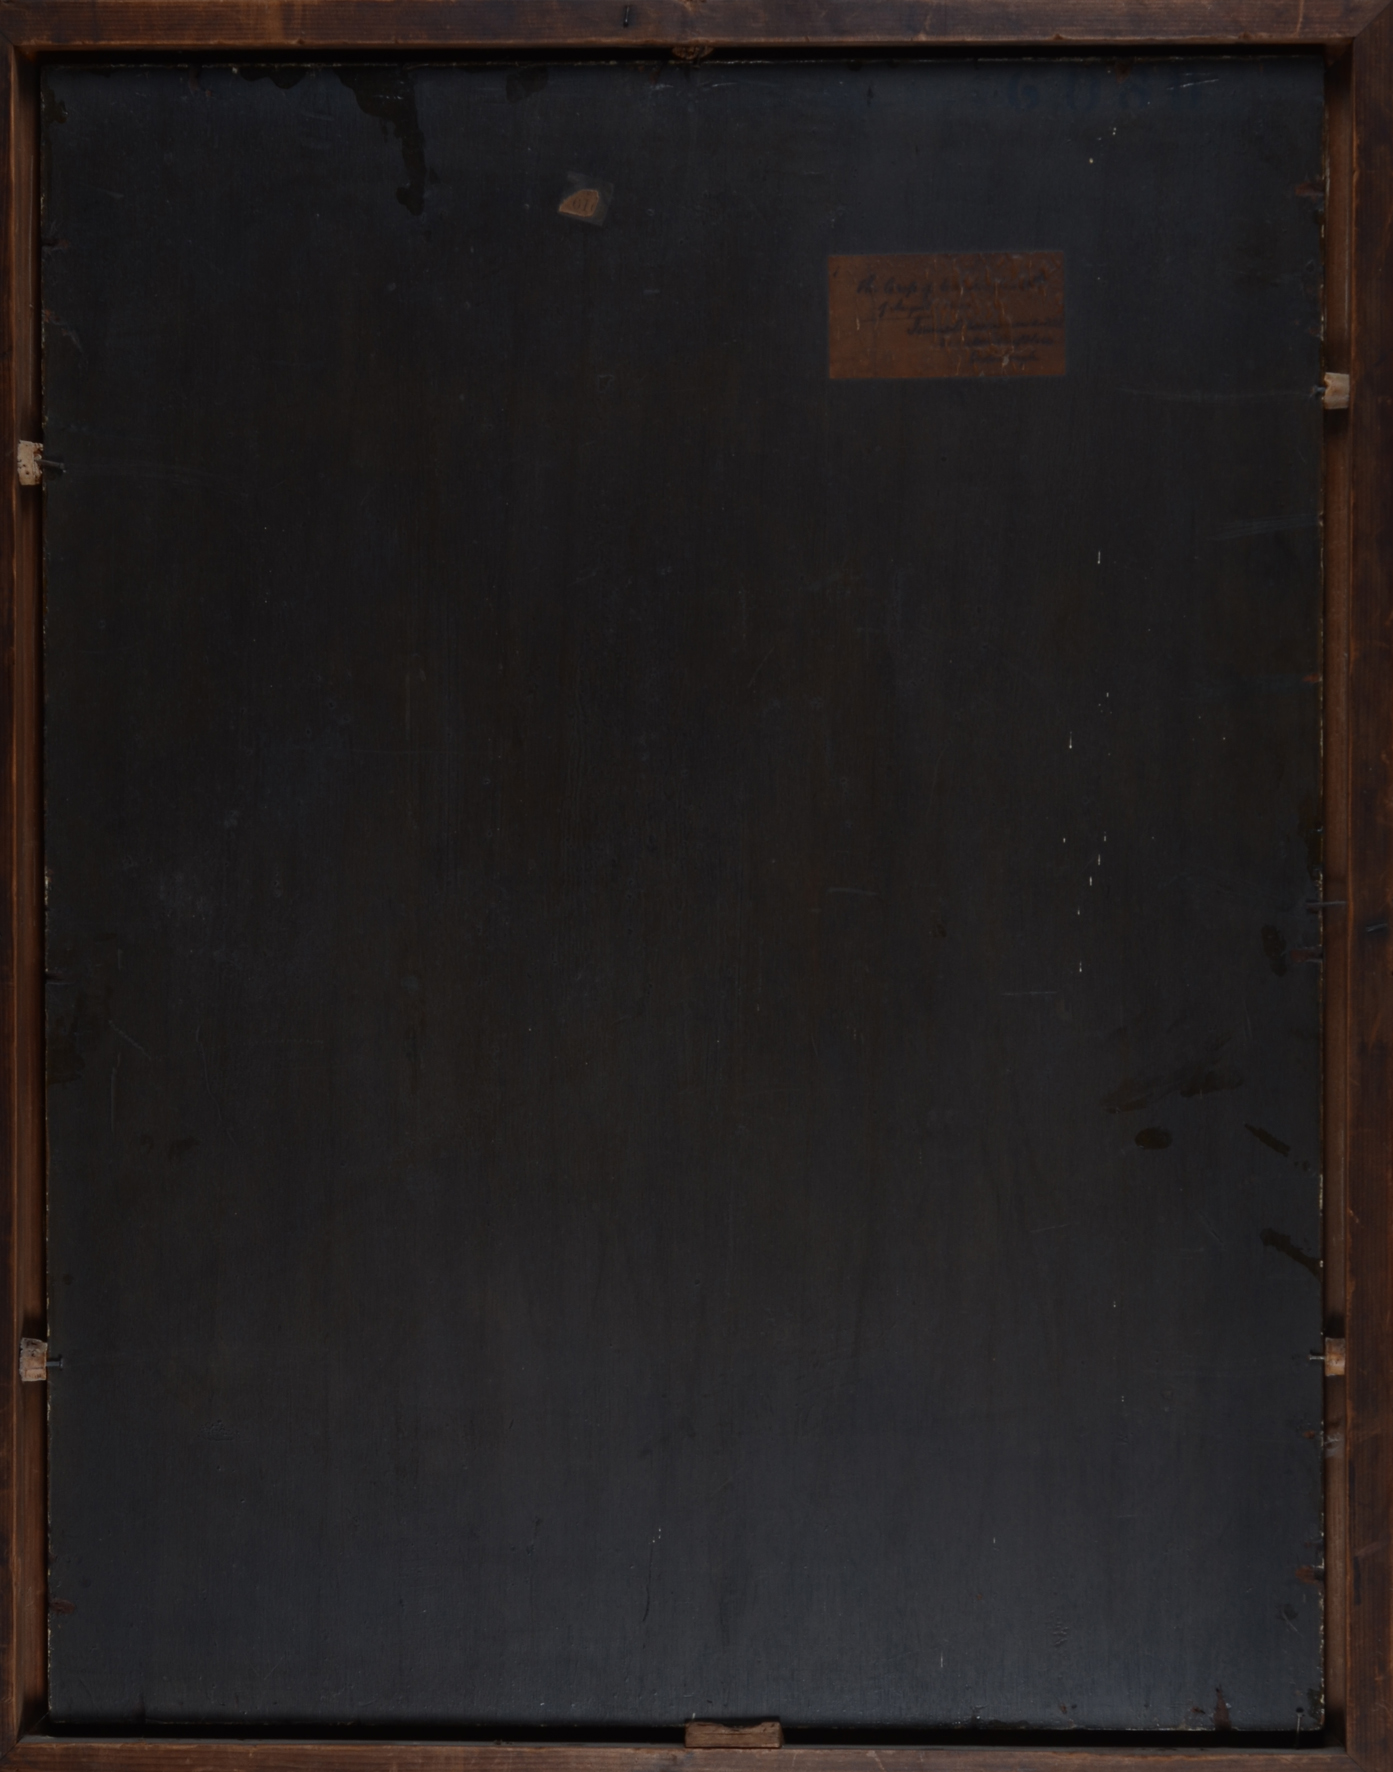 James Drummond — Back of the panel